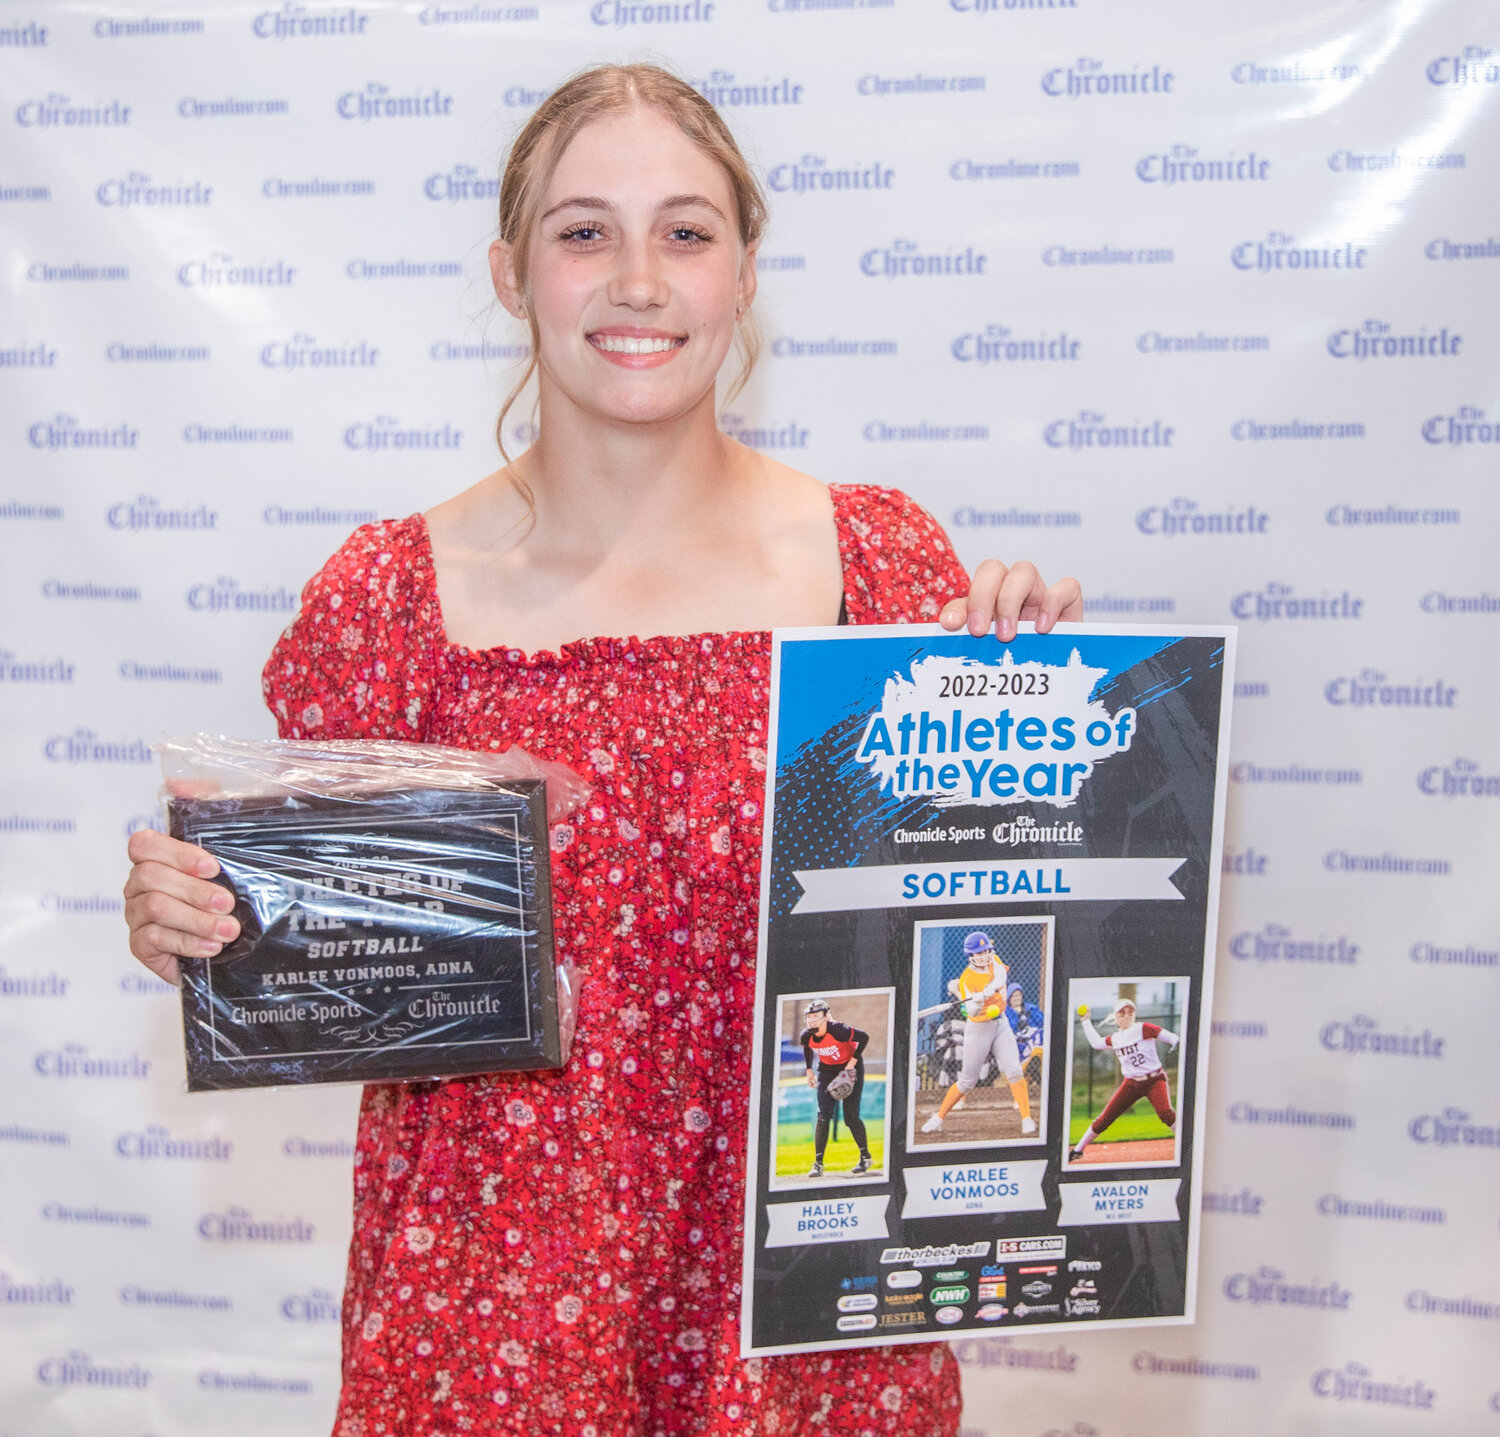 Adna’s Karlee VonMoos, a league MVP in each of the three sports she played this year, smiles for a photo Tuesday evening during the “Athletes of the Year” banquet at the Jester Auto Museum. VonMoos dominated the soccer pitch, basketball court and the softball diamond en route to one of the strongest all around sports careers in Adna.